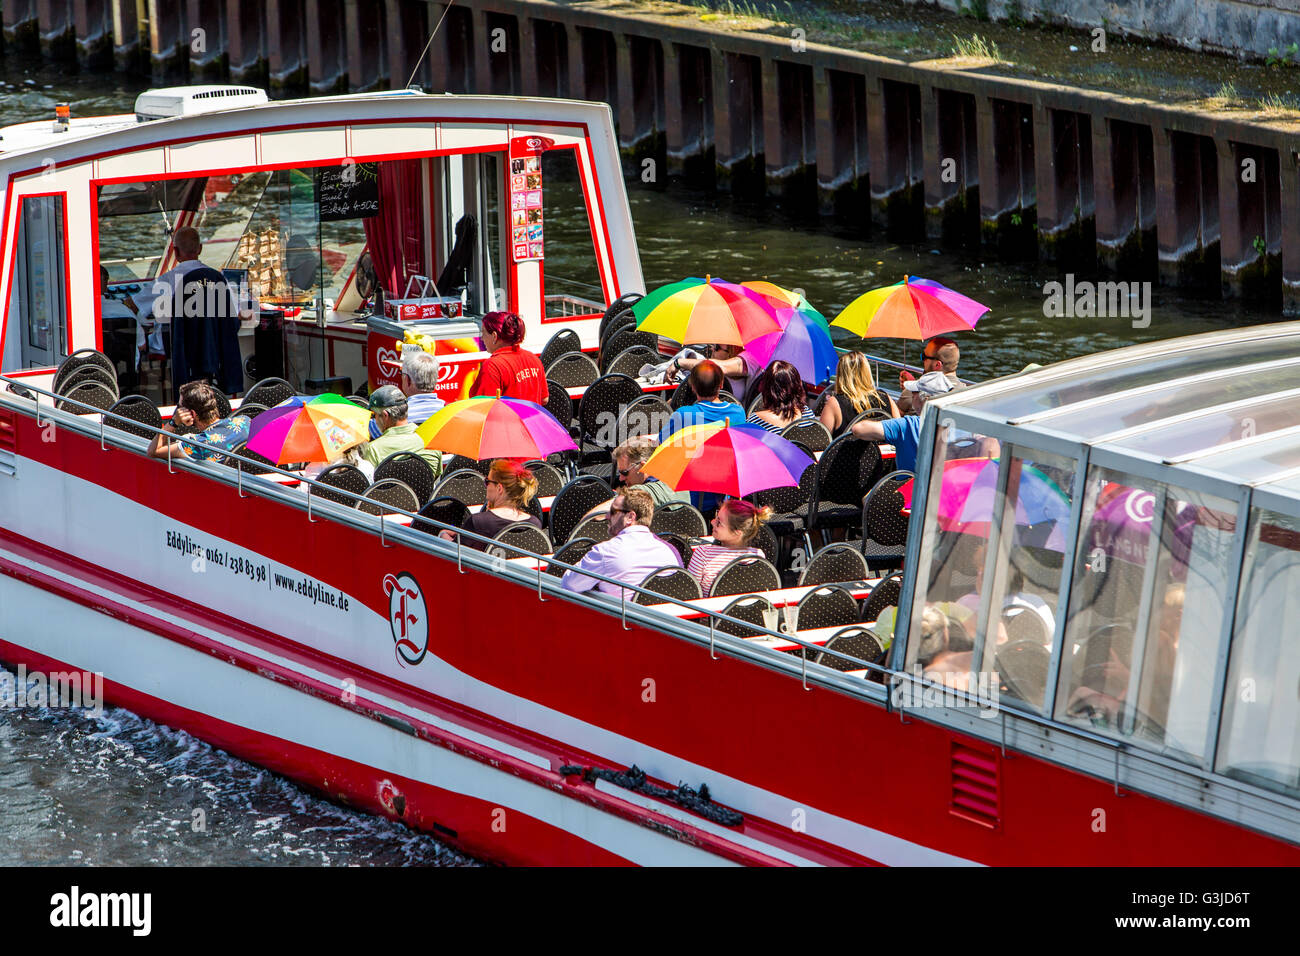 Sightseeing boat on the river Spree, Berlin, Germany, tourists with colored umbrellas, Stock Photo